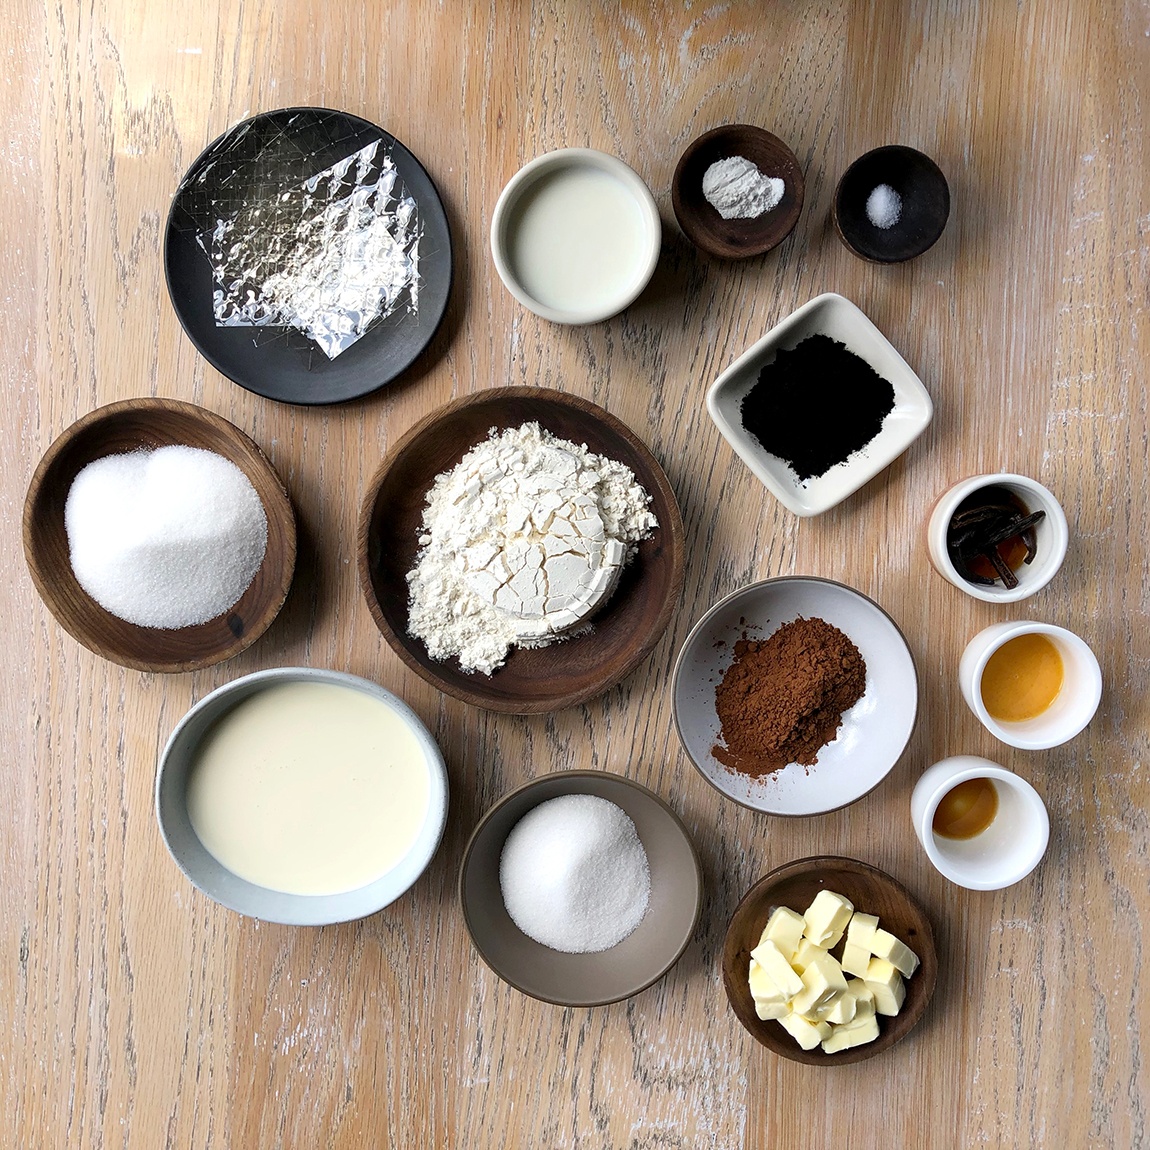 An aerial view of the ingredients in separate small bowls on a wood surface.